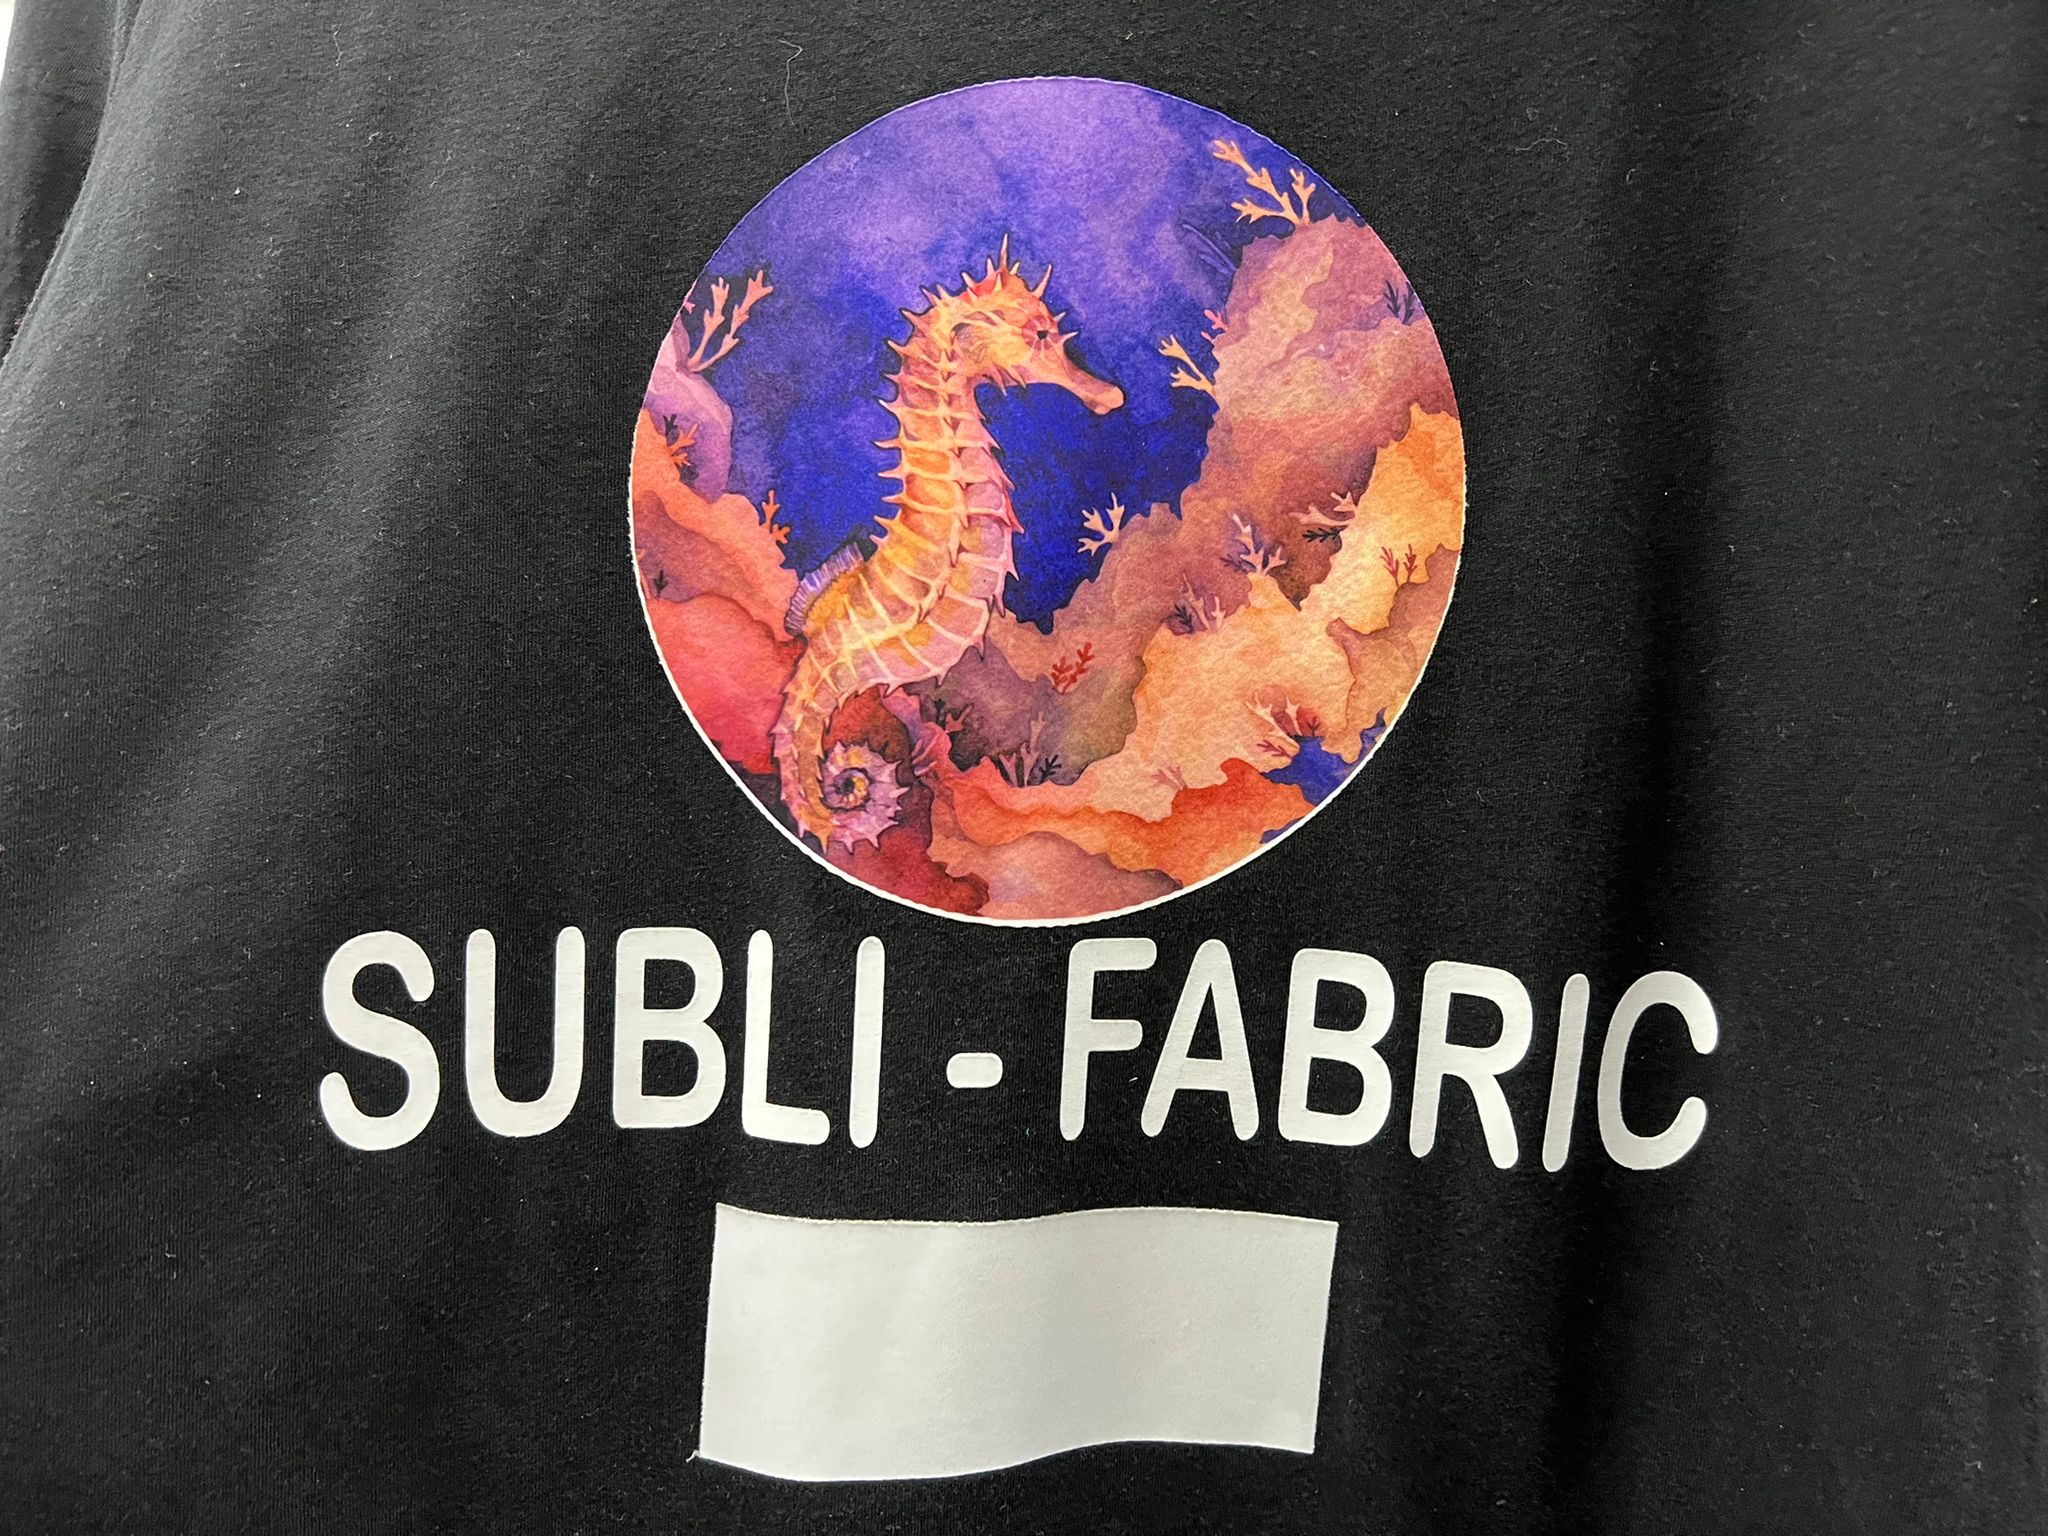 SUBLIFABRIC (SUBLIMABLE)